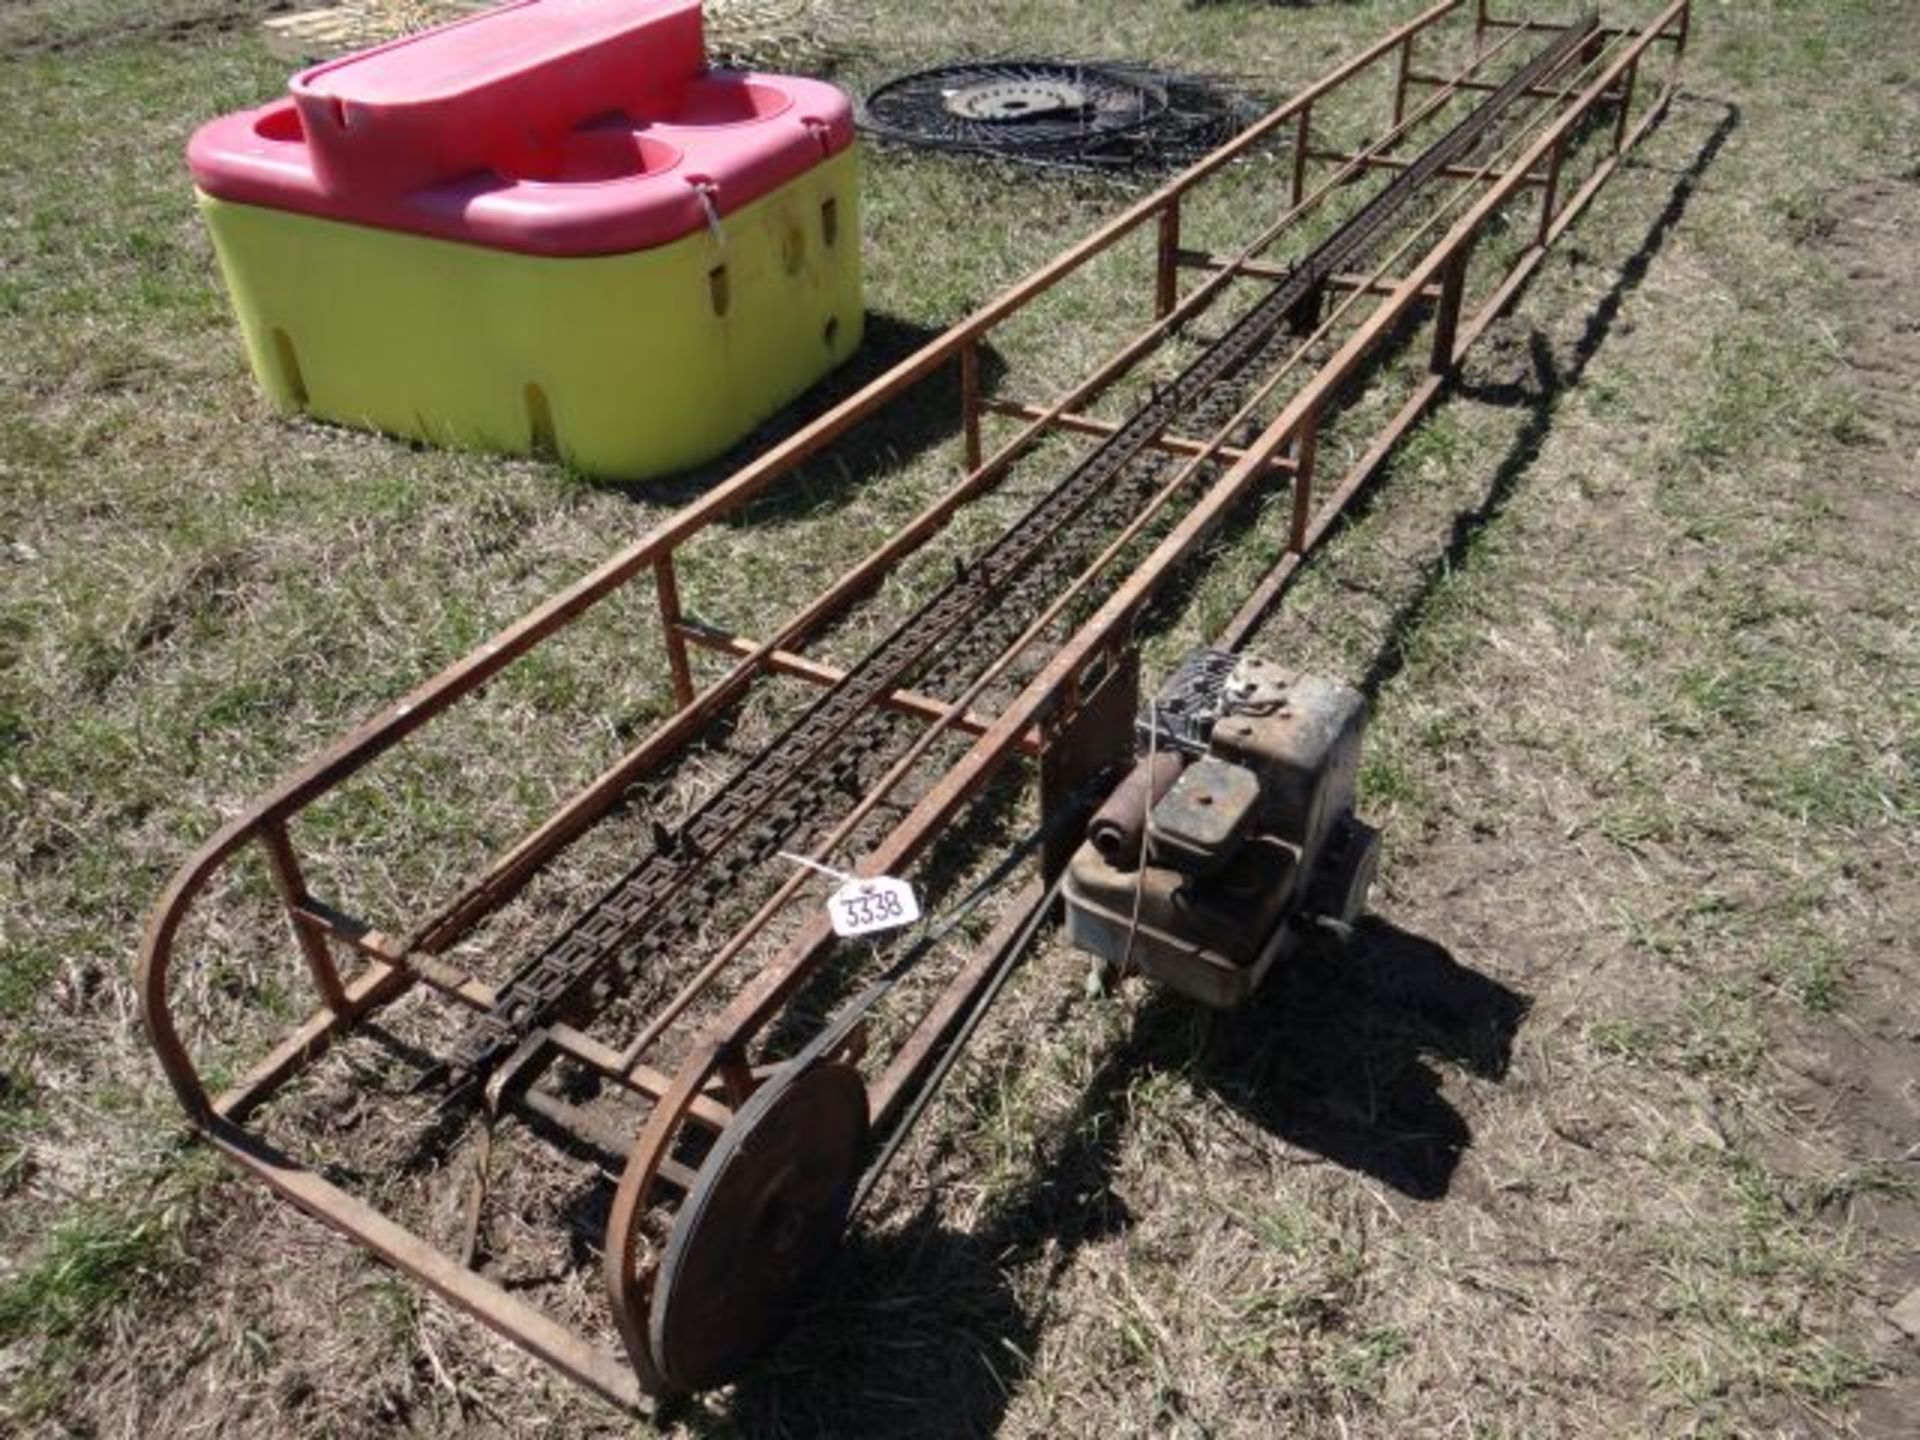 Lot 3338 Bale Elevator Gas Enging, Needs Tune-up